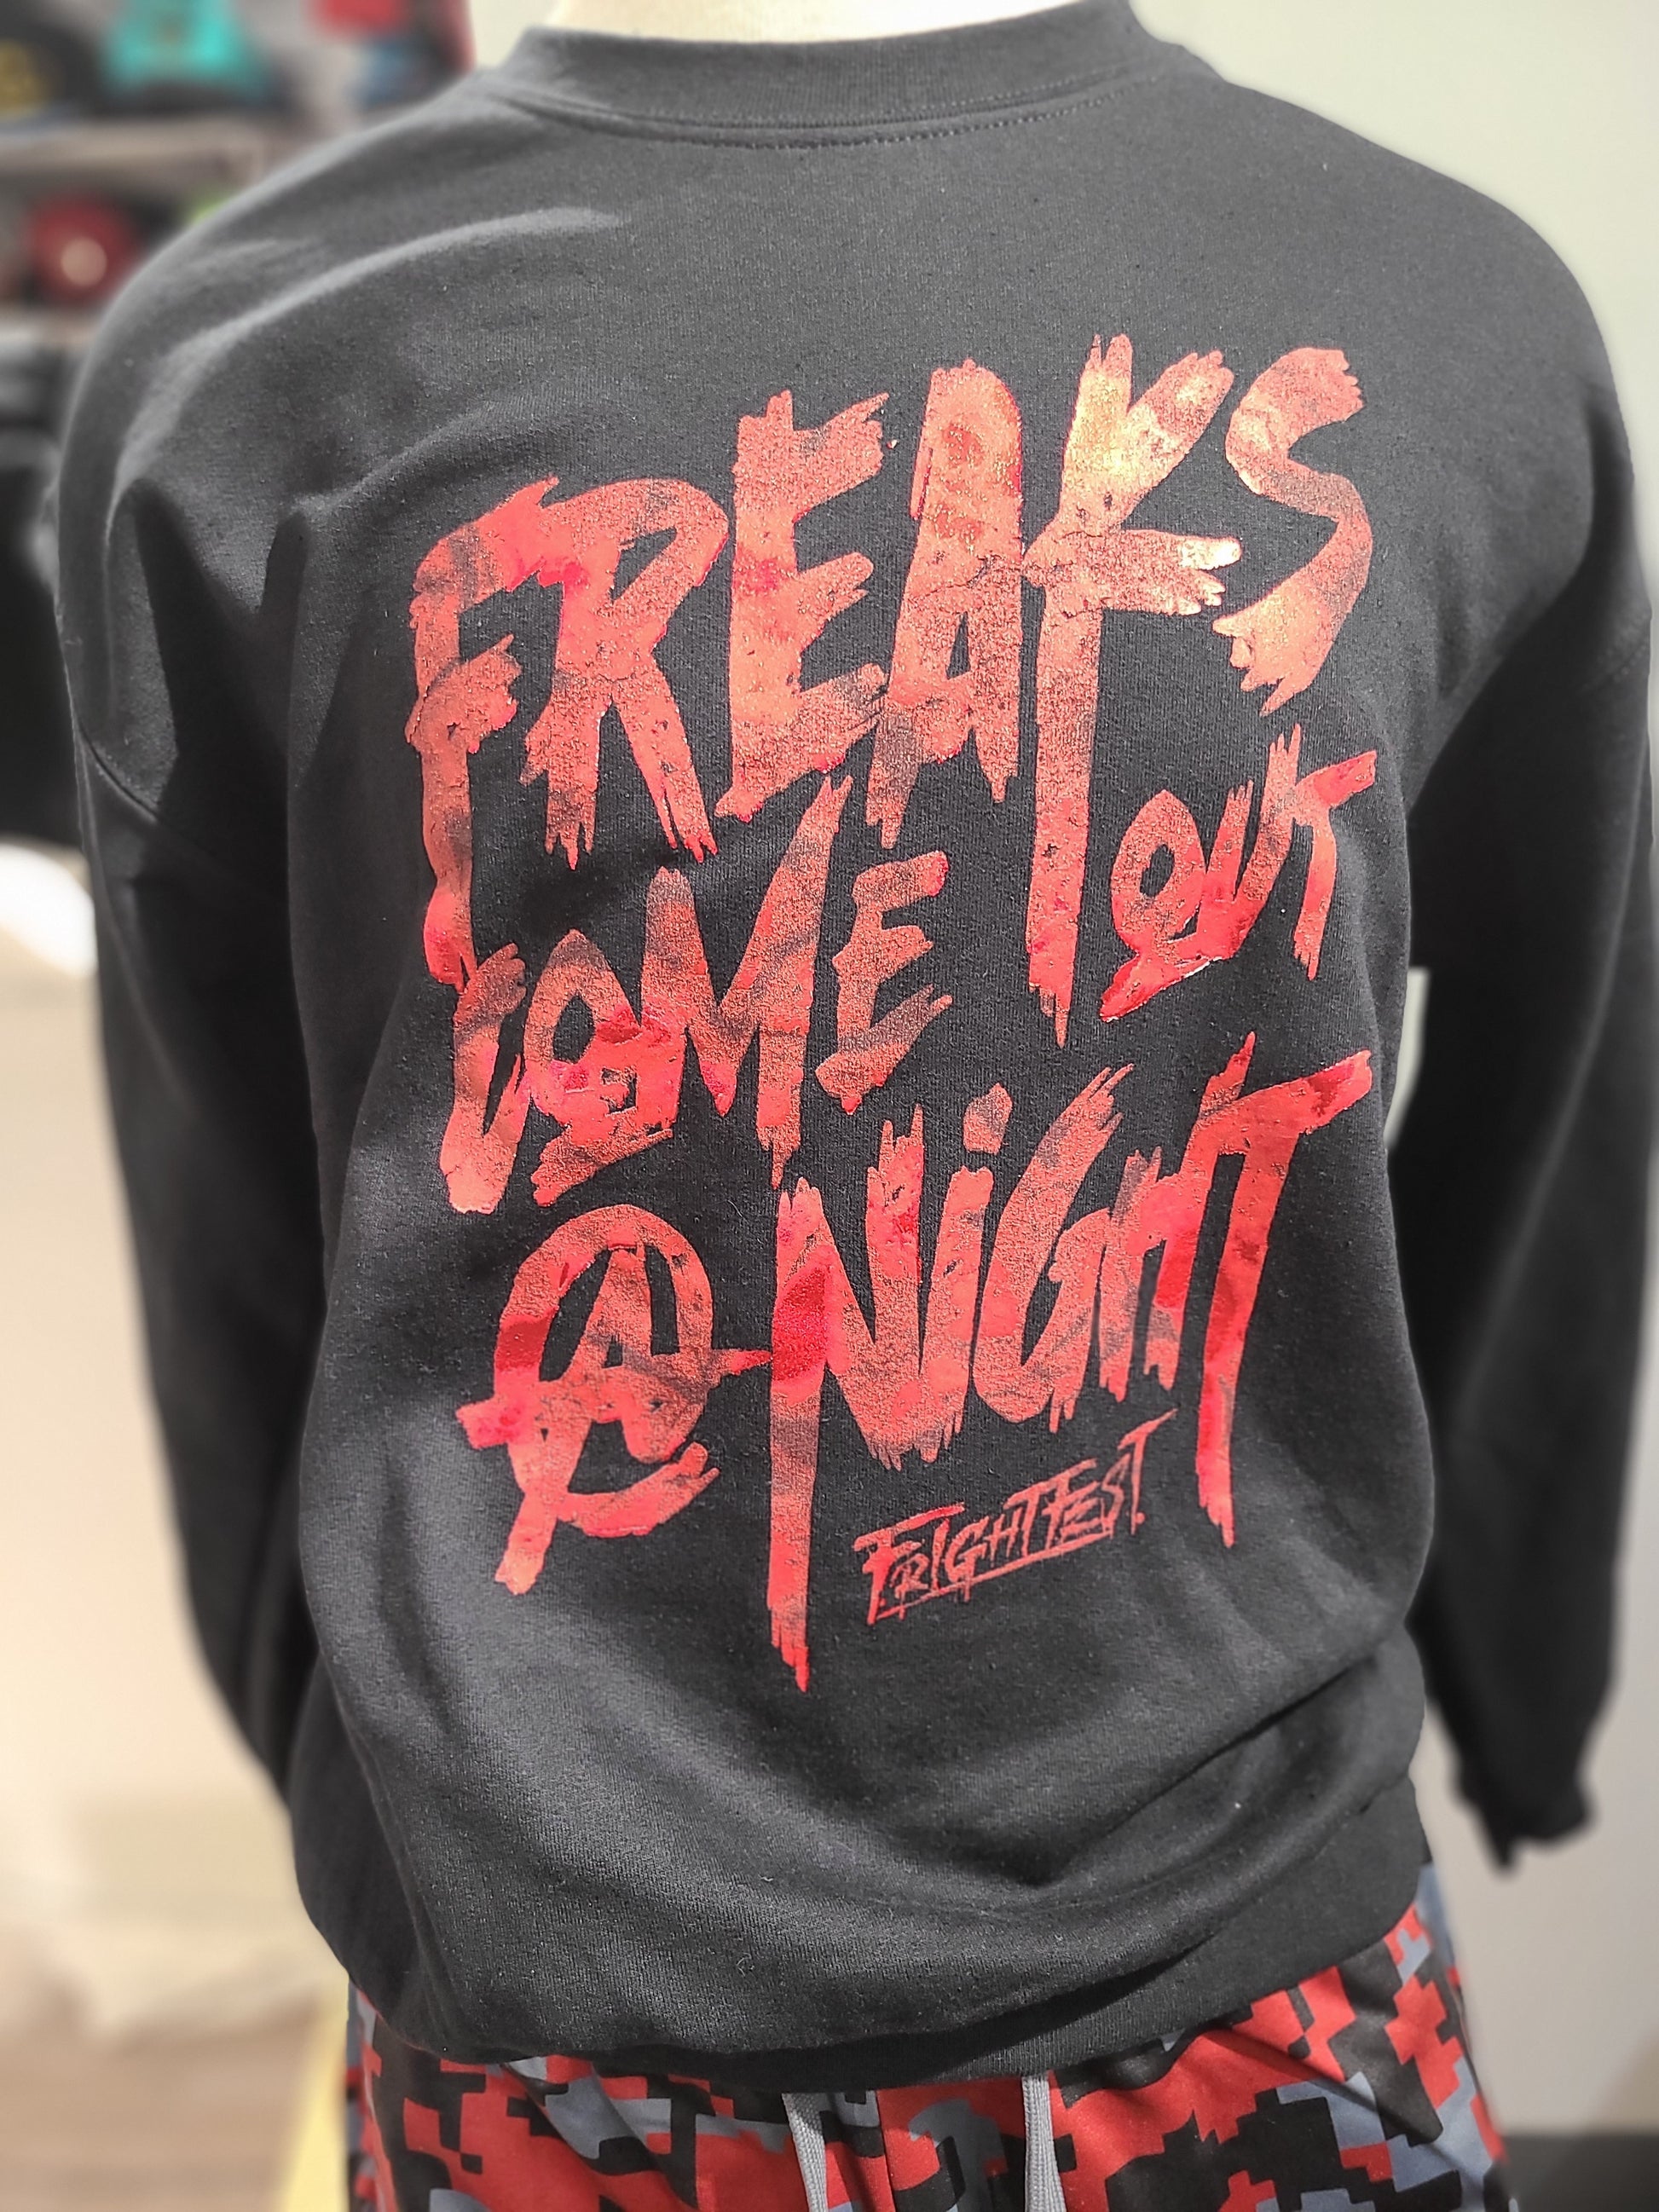 Freaks Come Out Crewneck on display